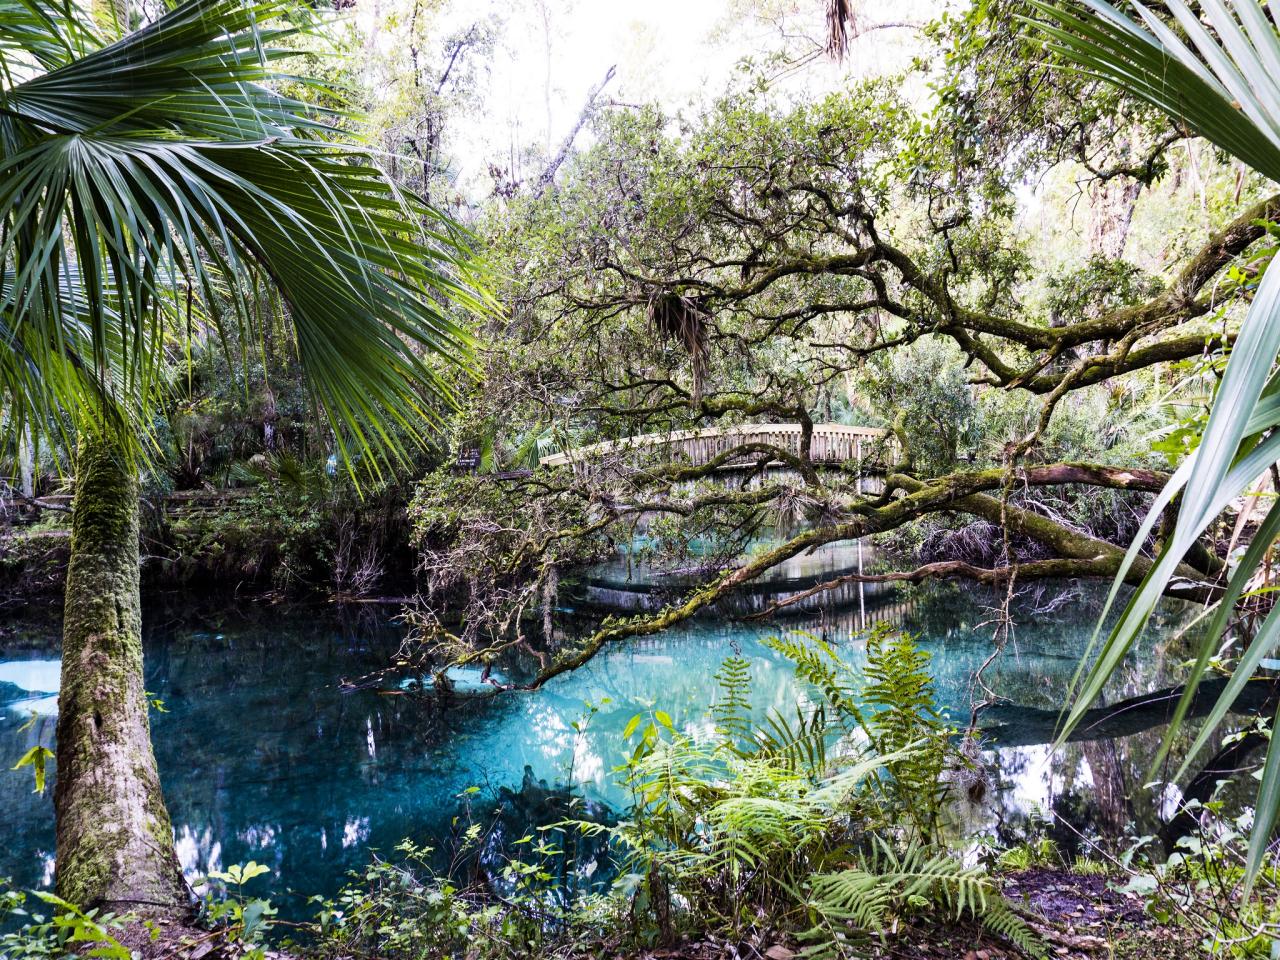 20 Most Beautiful Natural Springs in Florida to Add to Your Bucket List